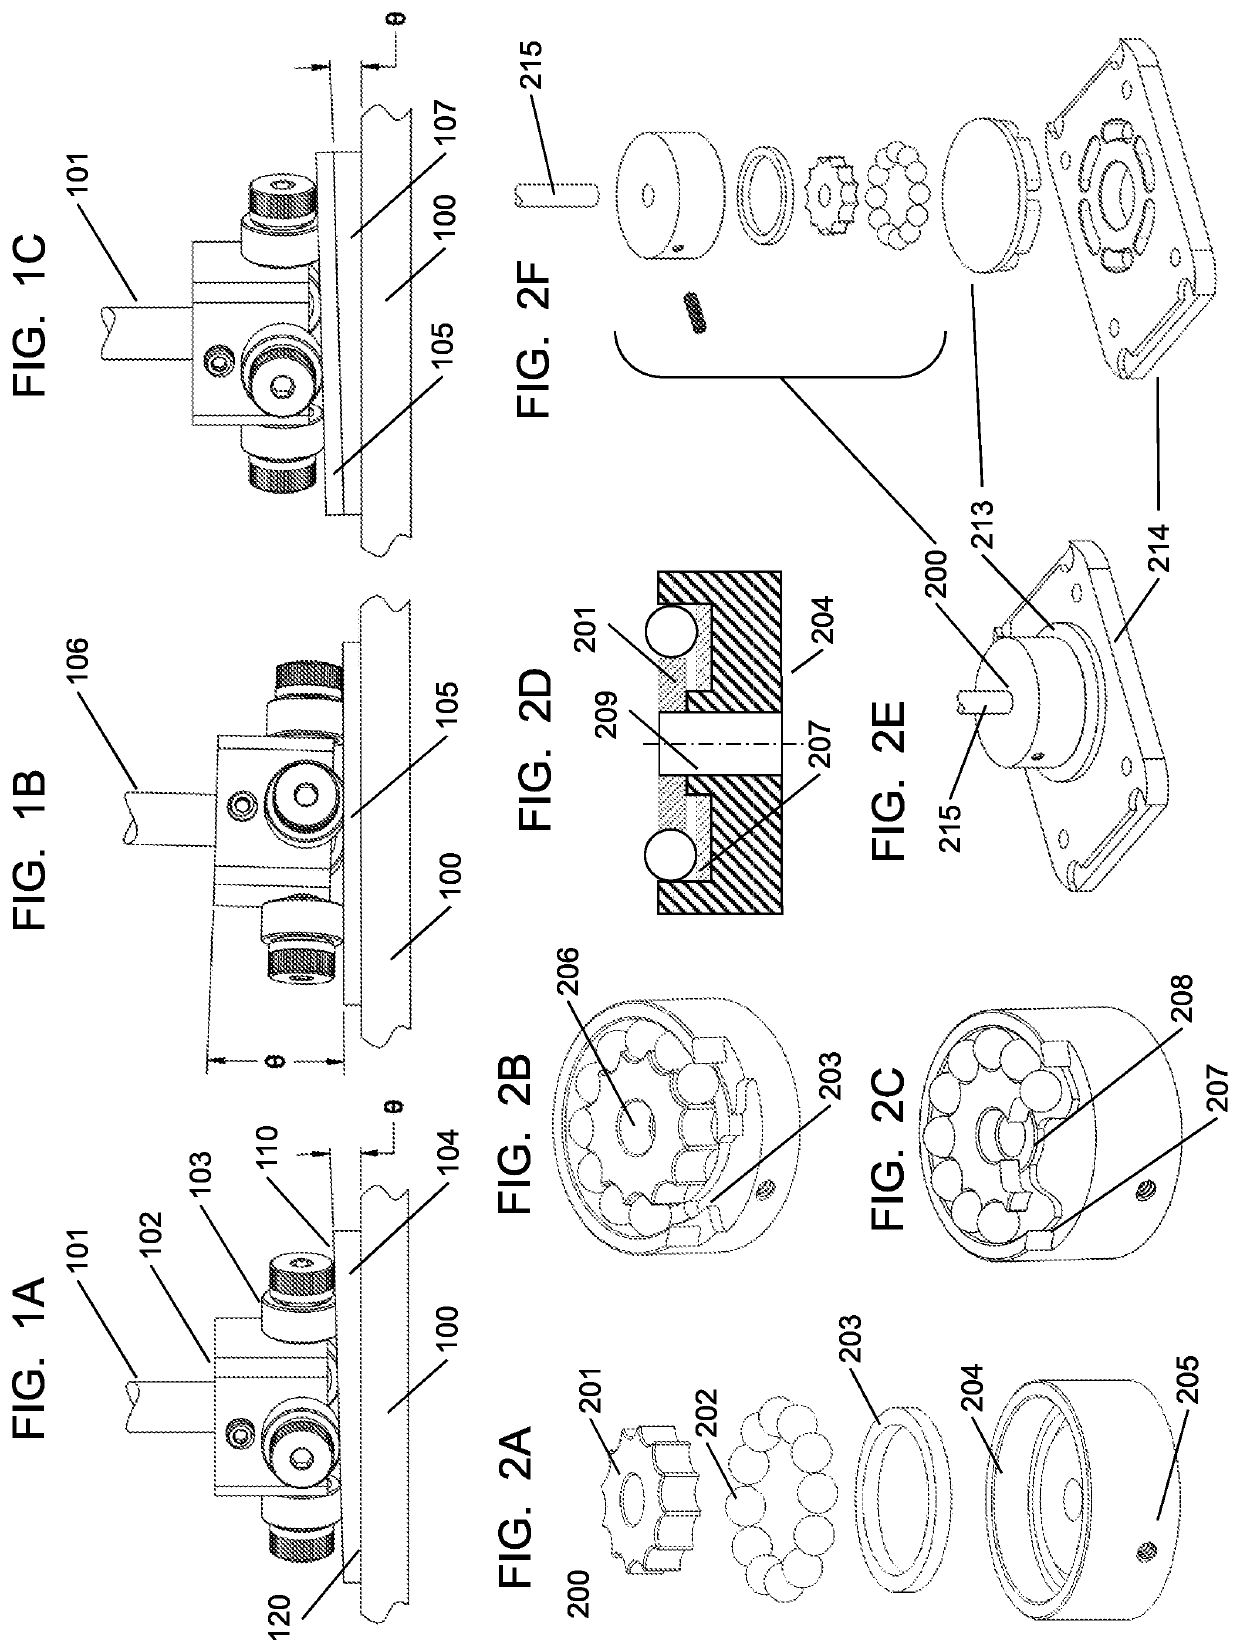 Microfluidic systems, pumps, valves, fluidic chips thereof, and applications of same